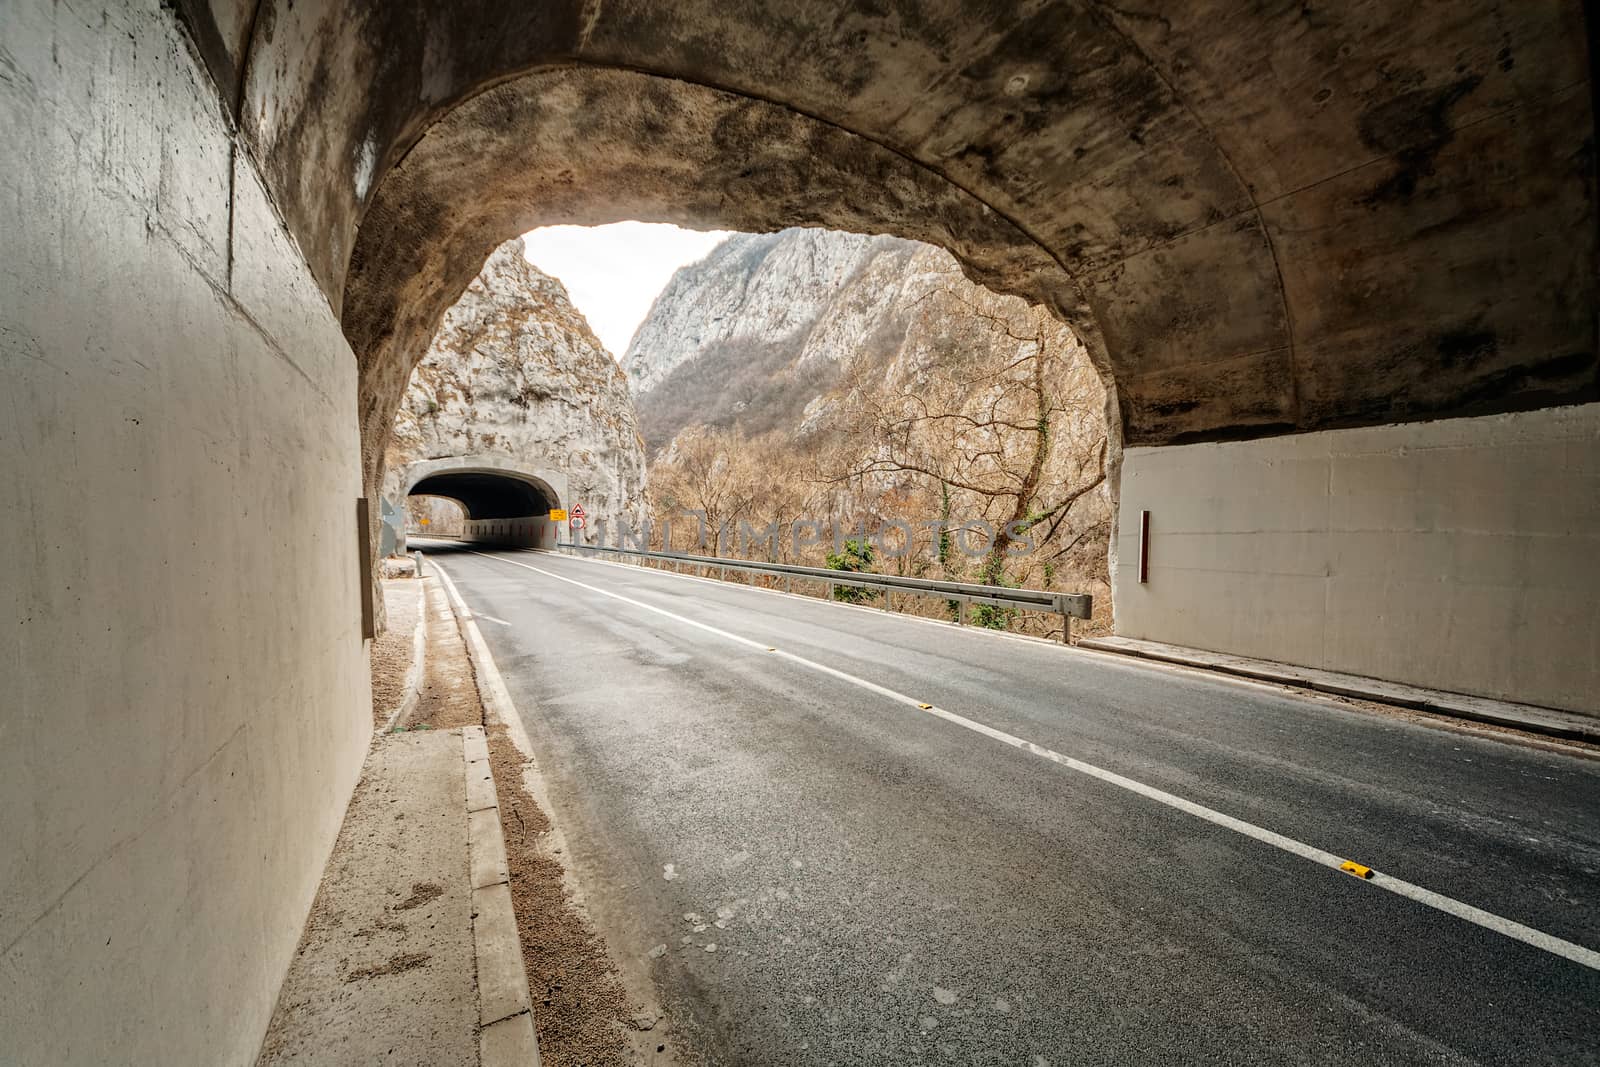 Tunnel on the road in the canyon during the winter on a cloudy day